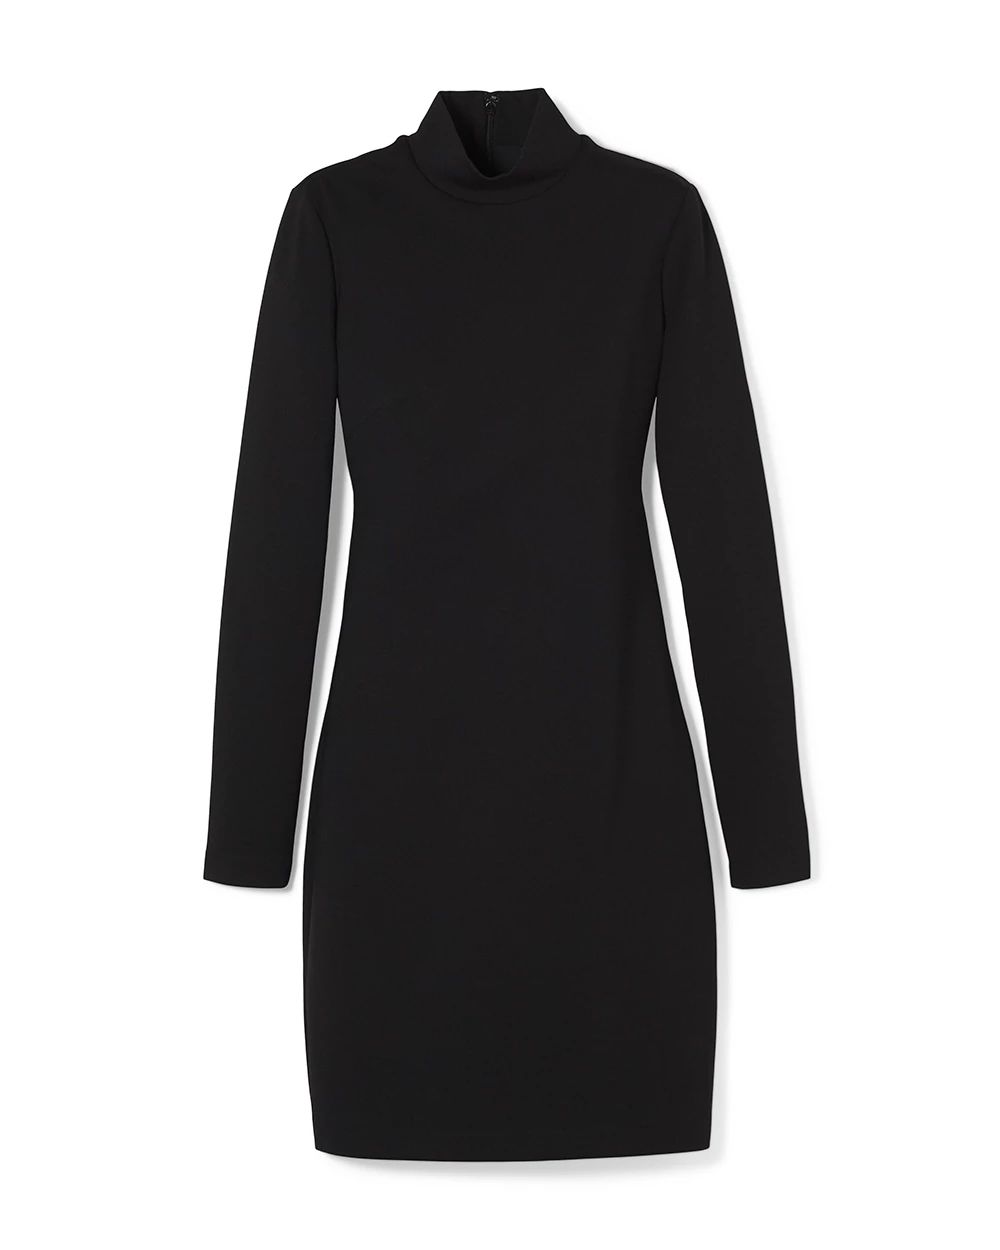 WHBM® AURA Long Sleeve Sculpting Mini Dress click to view larger image.